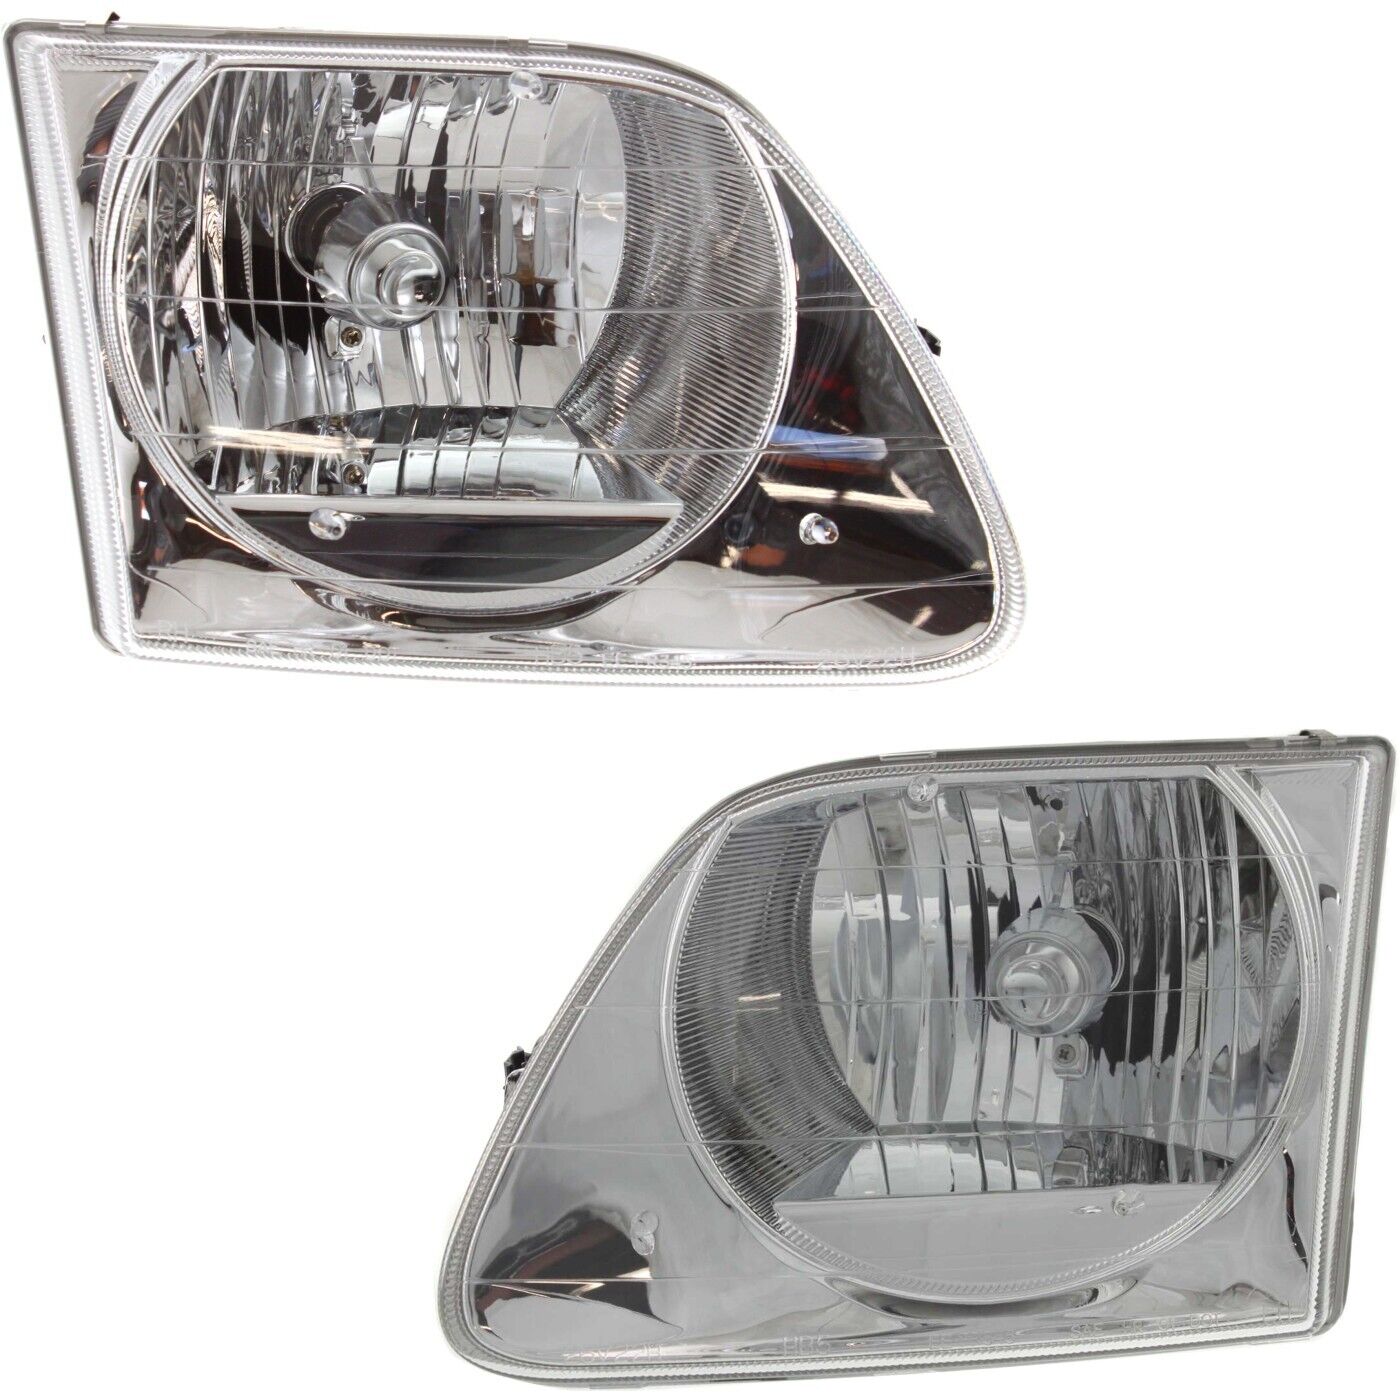 97-03/02 Replacement Headlight For Ford F150 Lightning SVT/Expedition Pair +Bulb